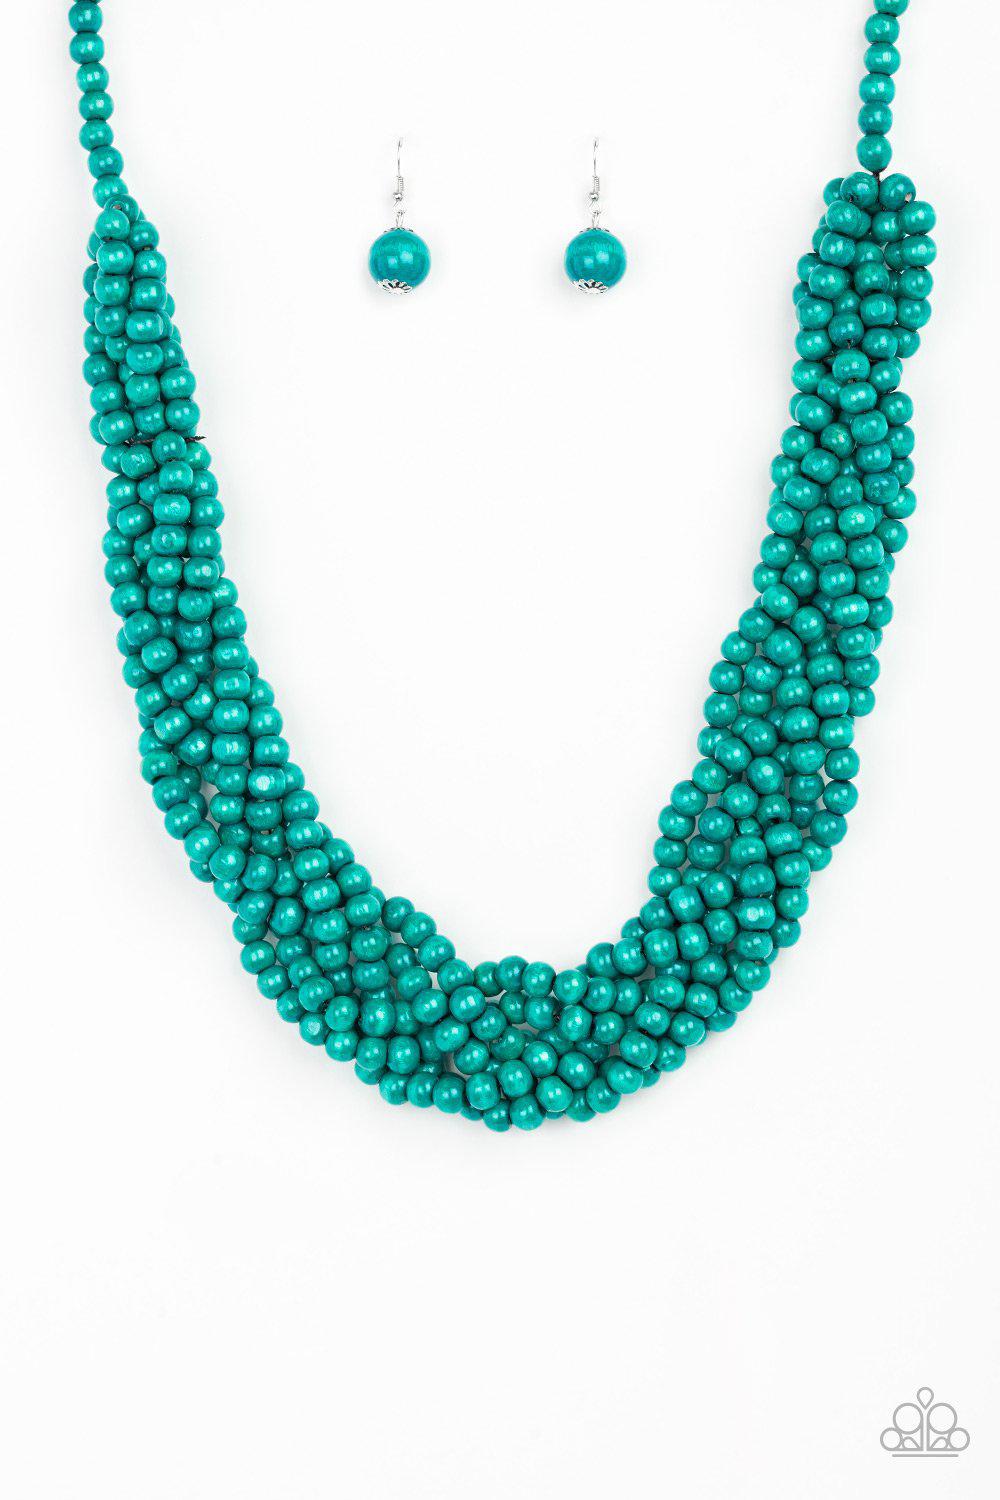 Tahiti Tropic Blue Wood Necklace and matching Earrings - Paparazzi Accessories-CarasShop.com - $5 Jewelry by Cara Jewels